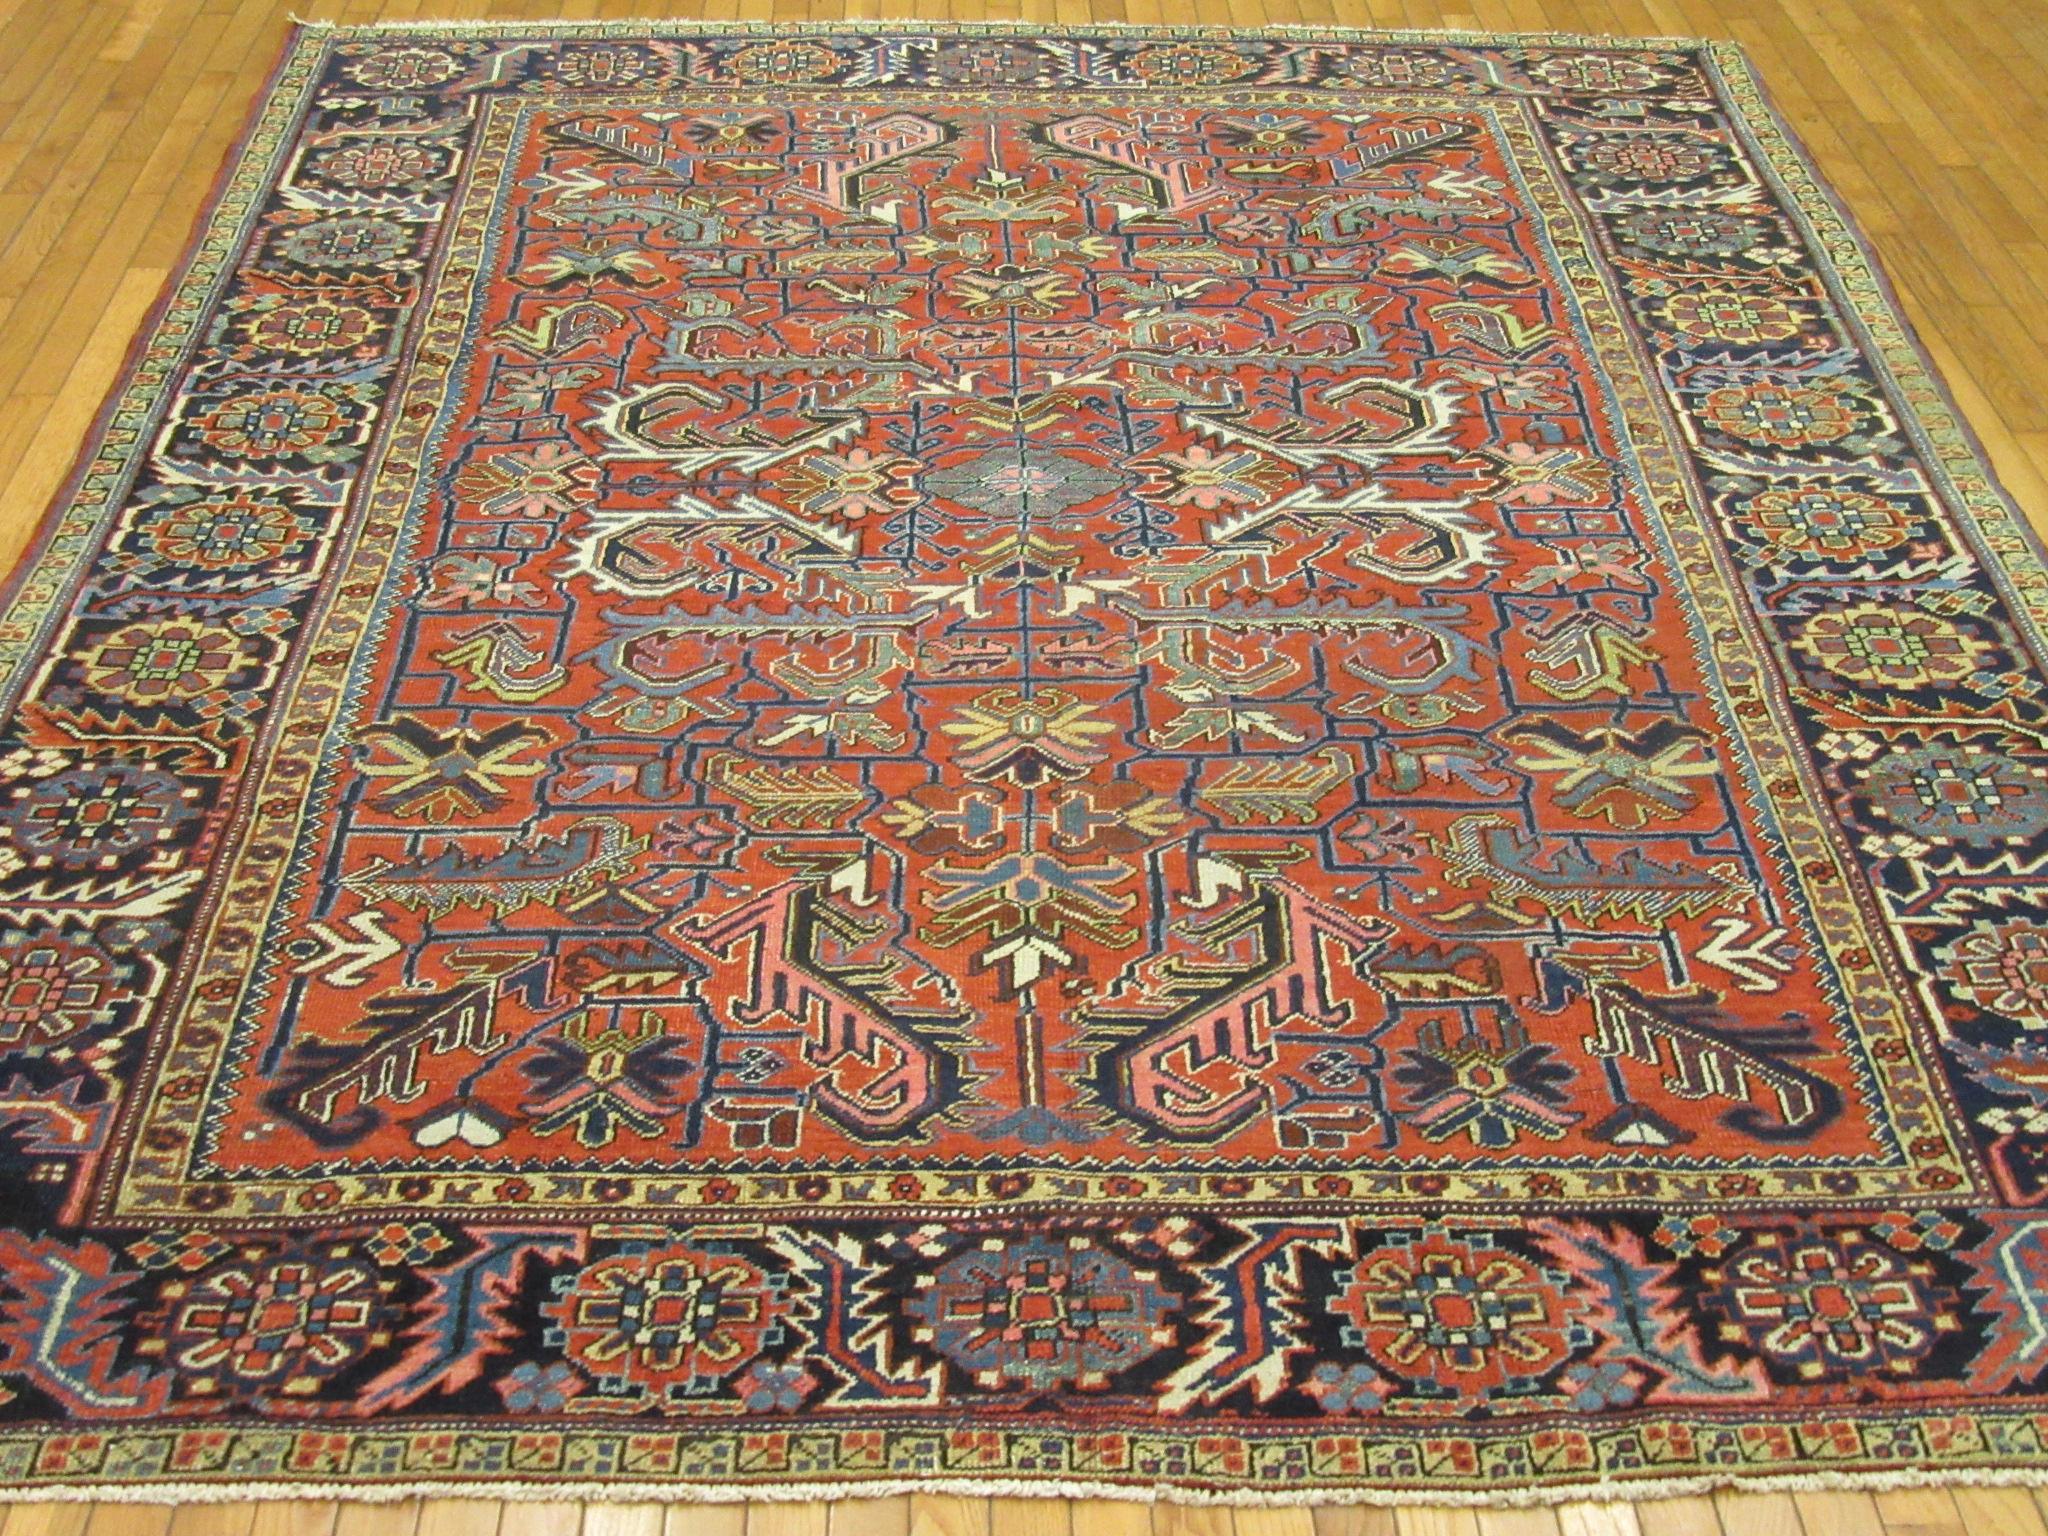 This is an antique hand-knotted Persian Heriz area rug. It is made with naturally dyed wool on cotton foundation. The rug has an all-over geometric pattern exclusive to the Heriz rugs. It measures: 7' 5'' x 9' 6'' and in great condition.